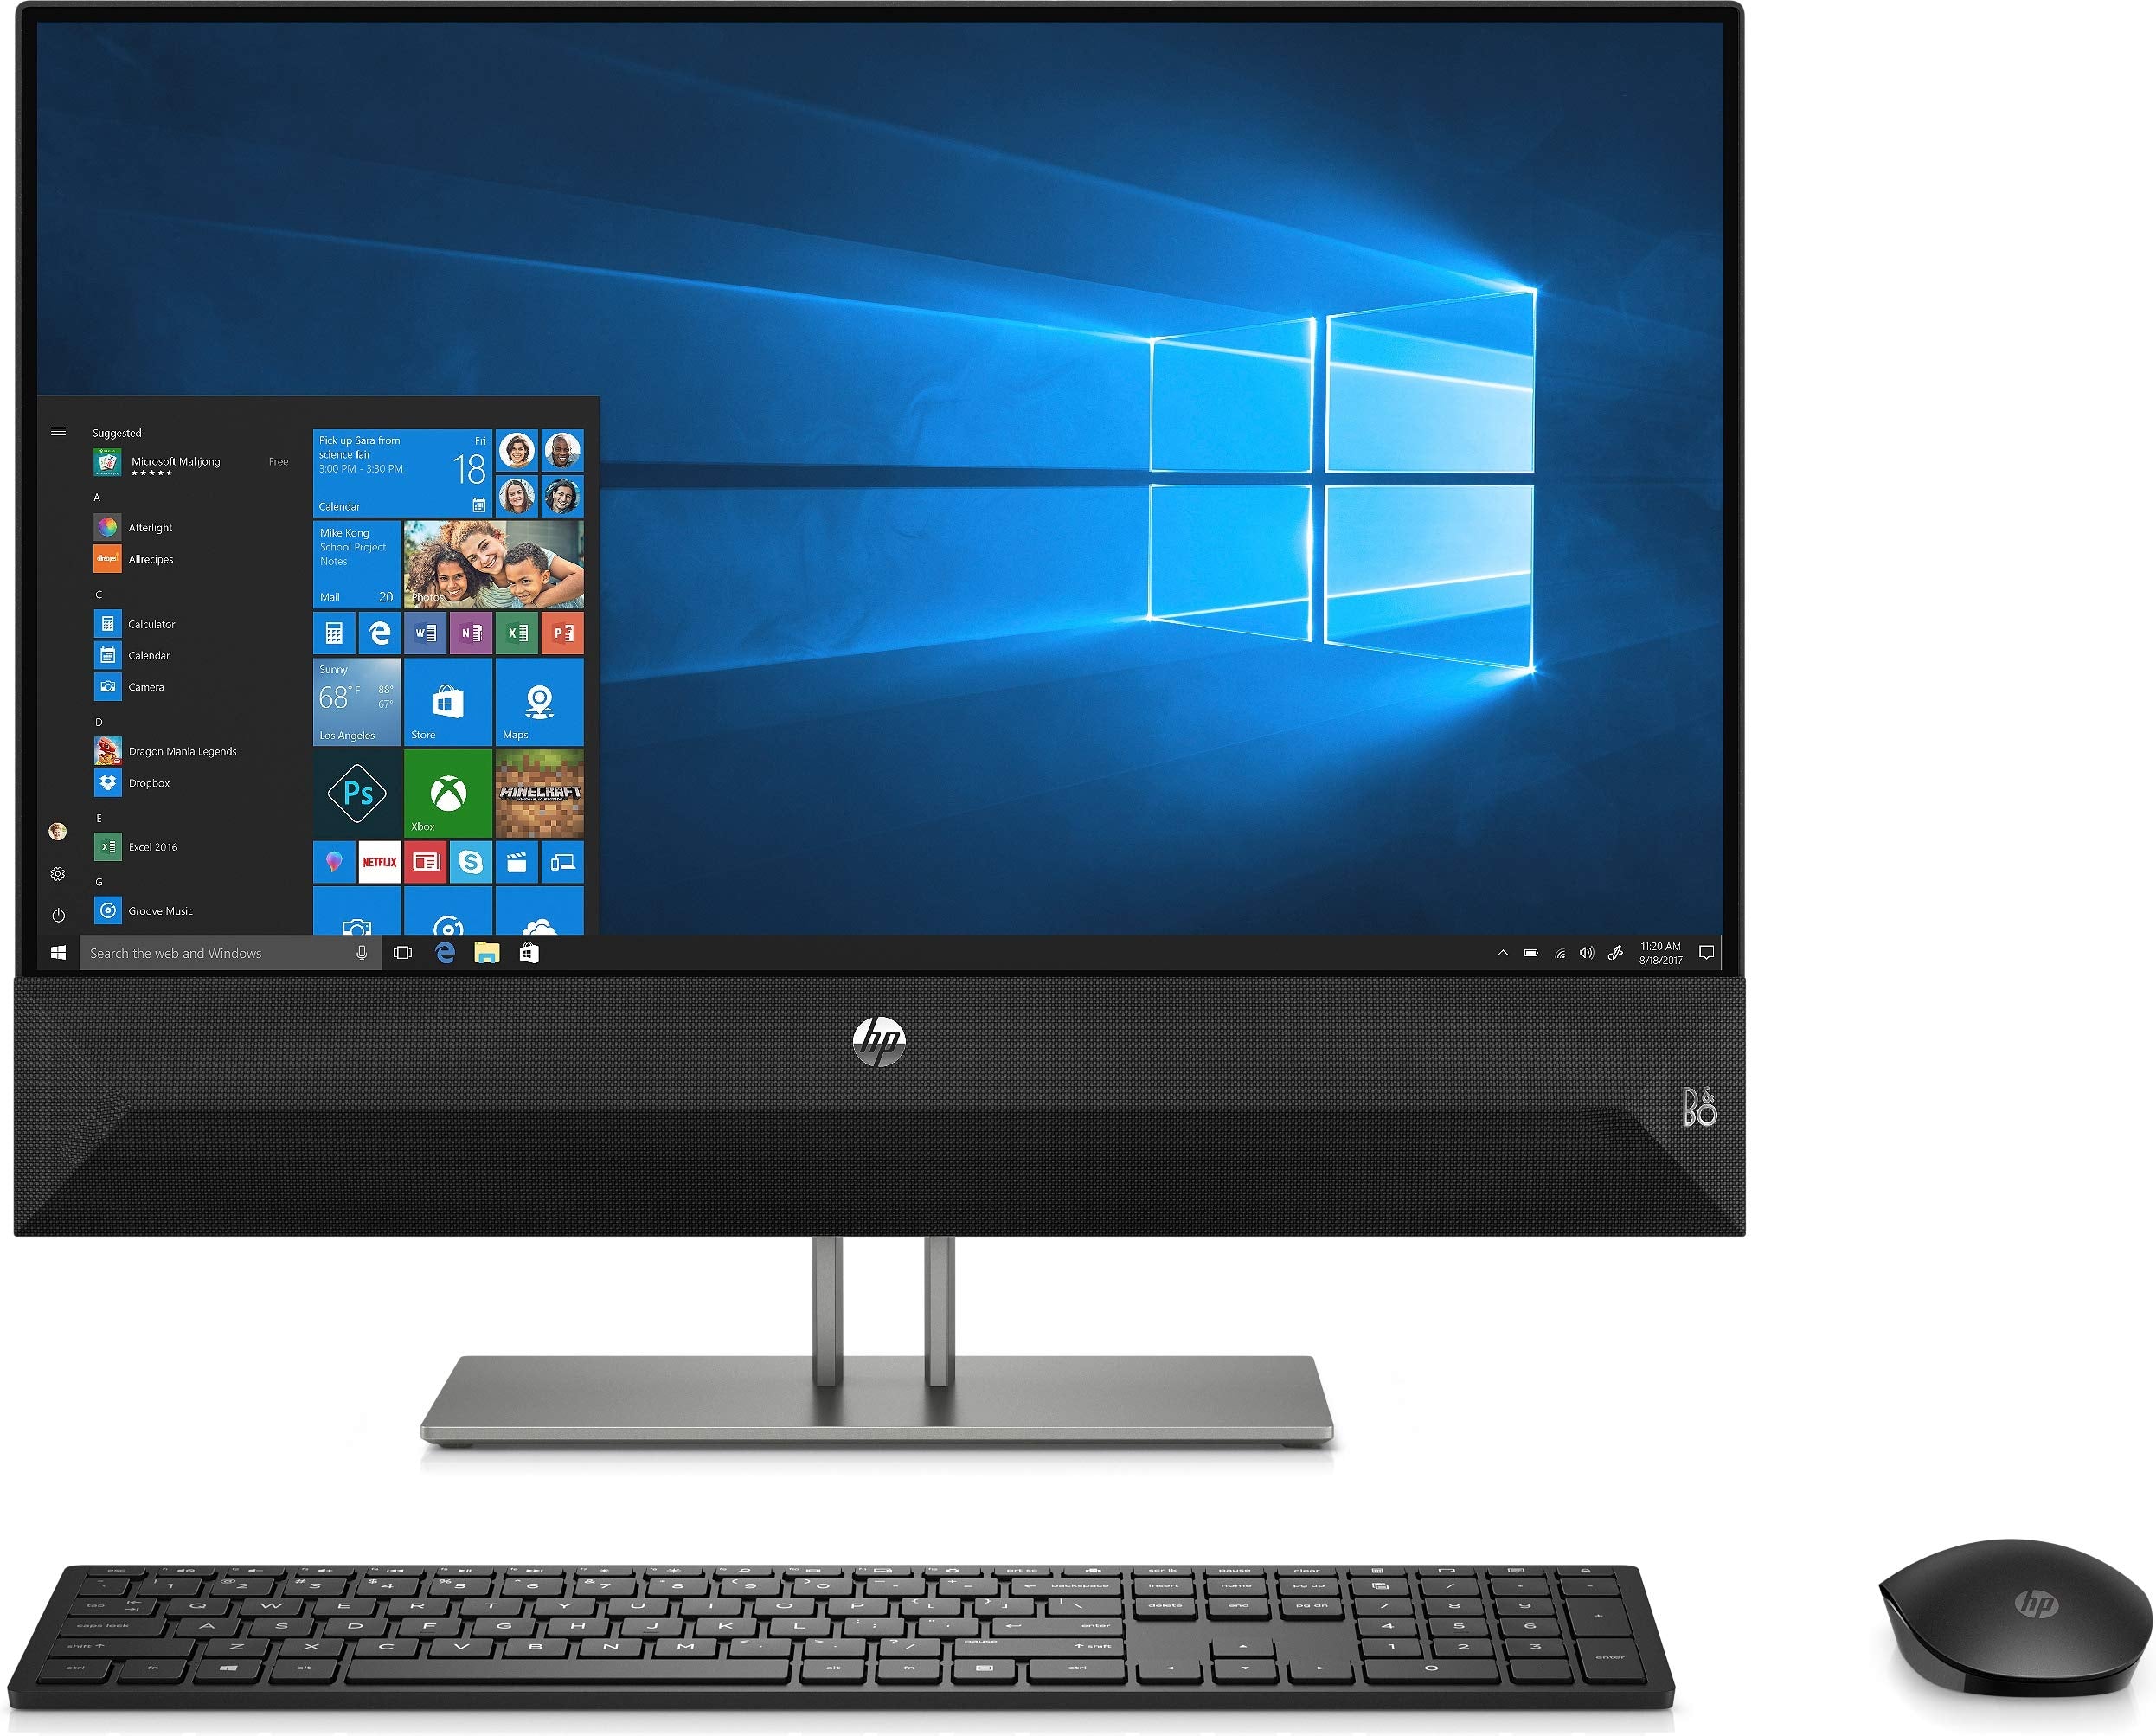 HP All In One Pavilion 24 Touch Intel 8-Core i7-9700t, 8GB, 1TB + 128GB SSD, 24 FHD Touchscreen, MX GeForce 230 2GB, Win 10, Eng- Keyboard, Black